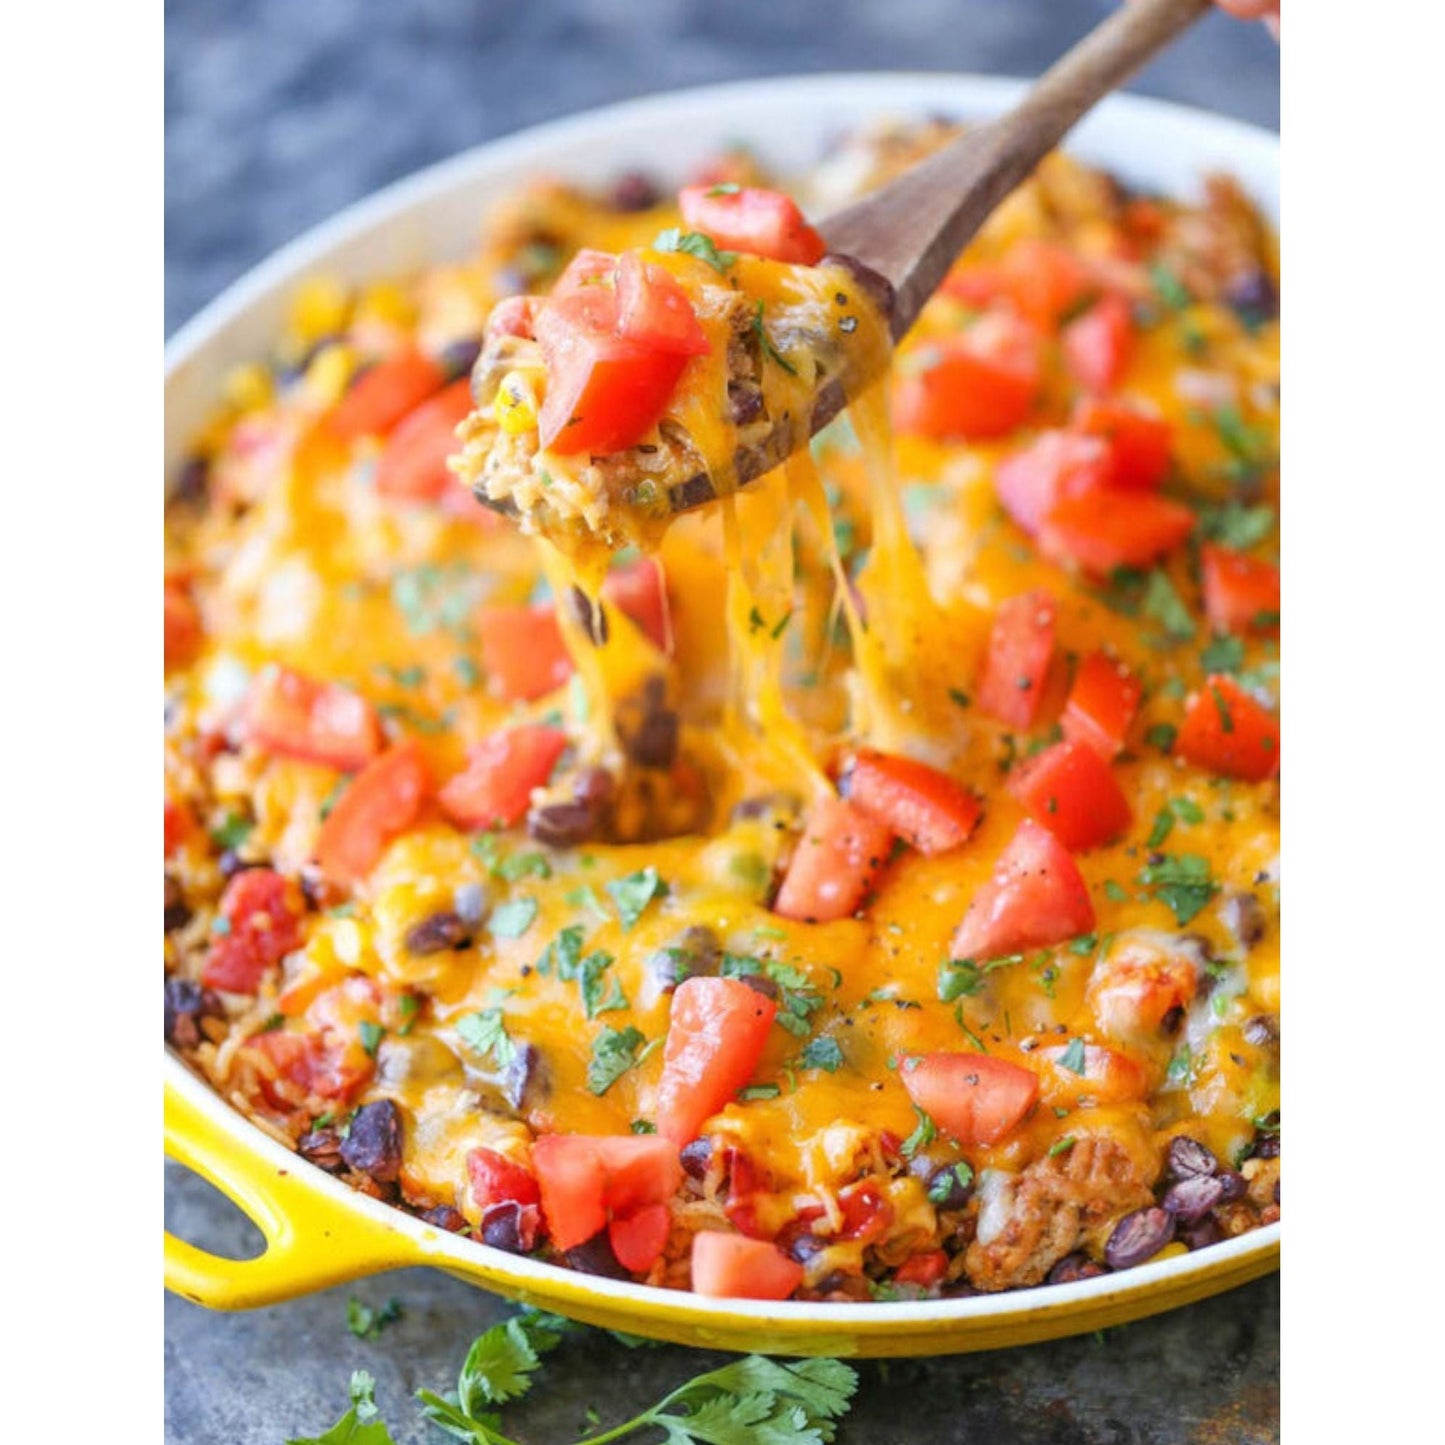 Cheesy Mexican skillet meal with colorful vegetables, tender meat, rice and melted cheese.